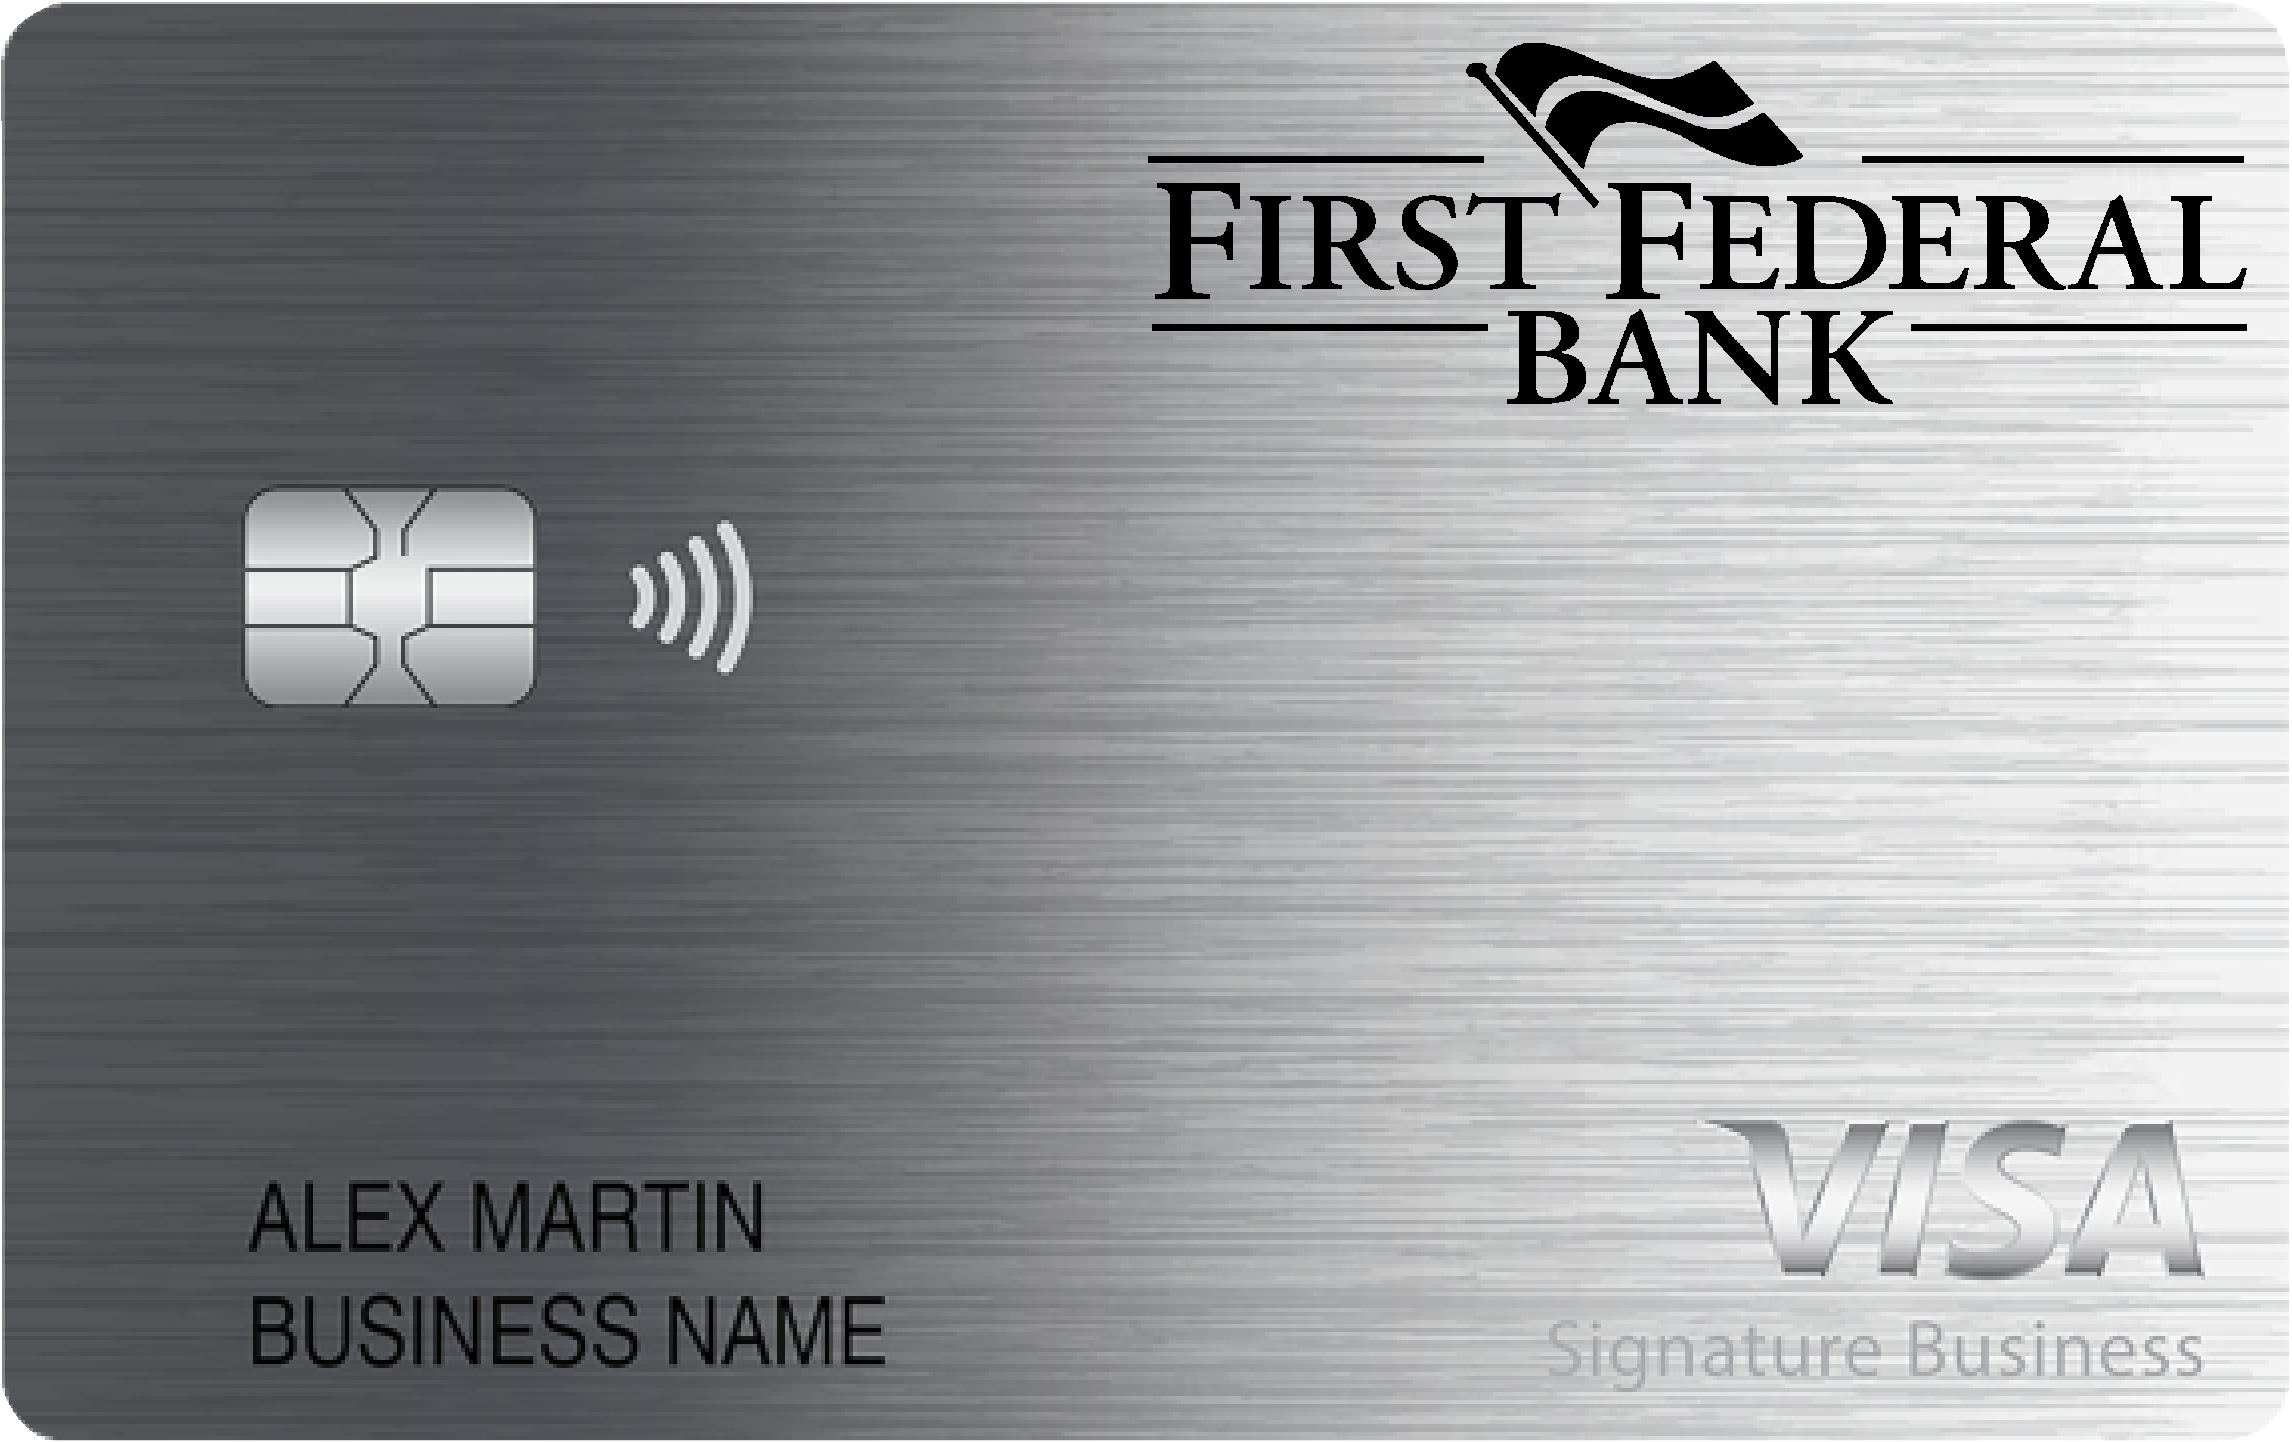 First Federal Bank of Wisconsin Smart Business Rewards Card